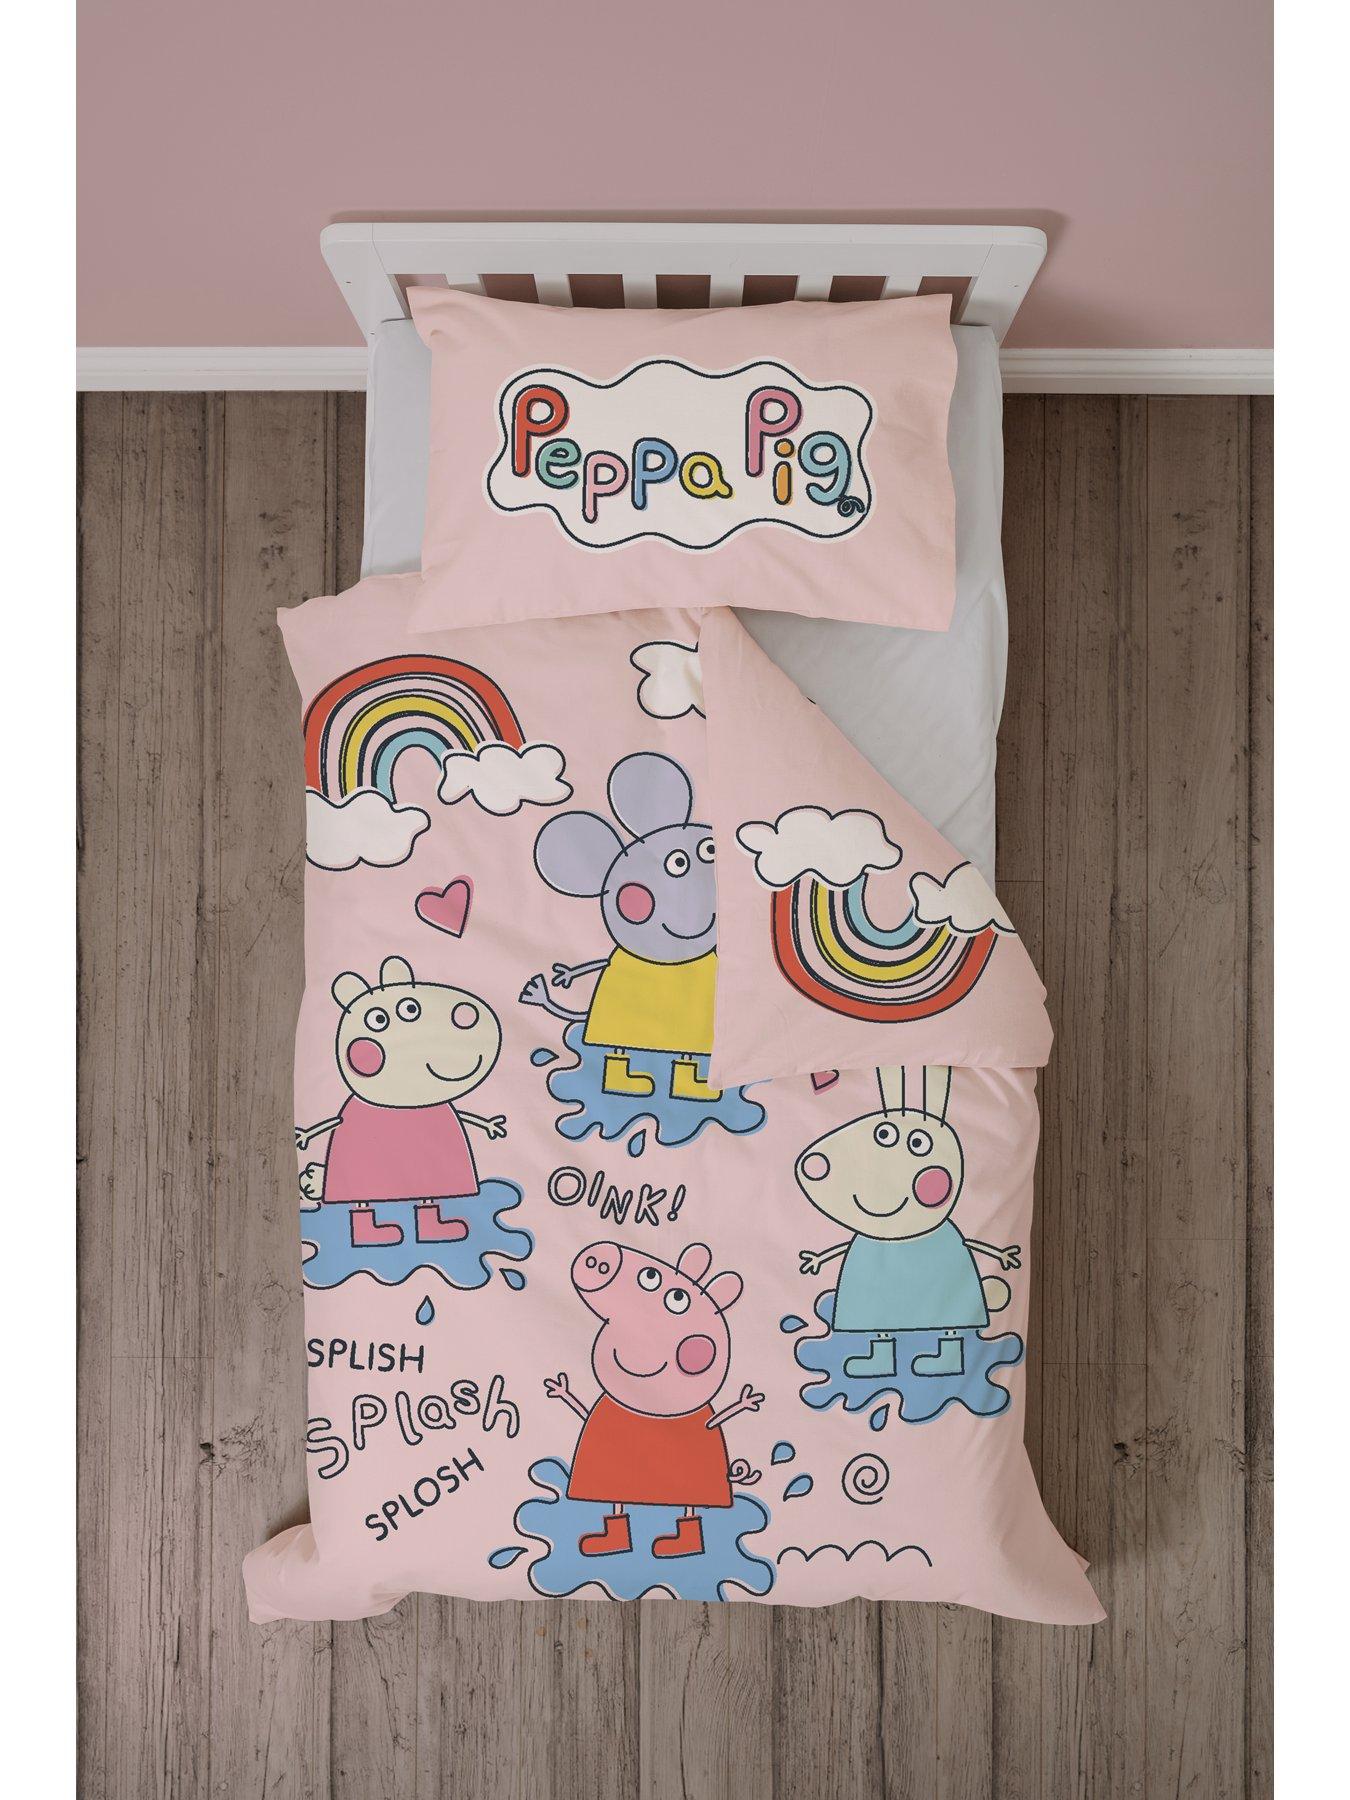 Peppa Pig World-15 Character Items Breakfast Sets,3D Tumblers,Bottle & Many  More